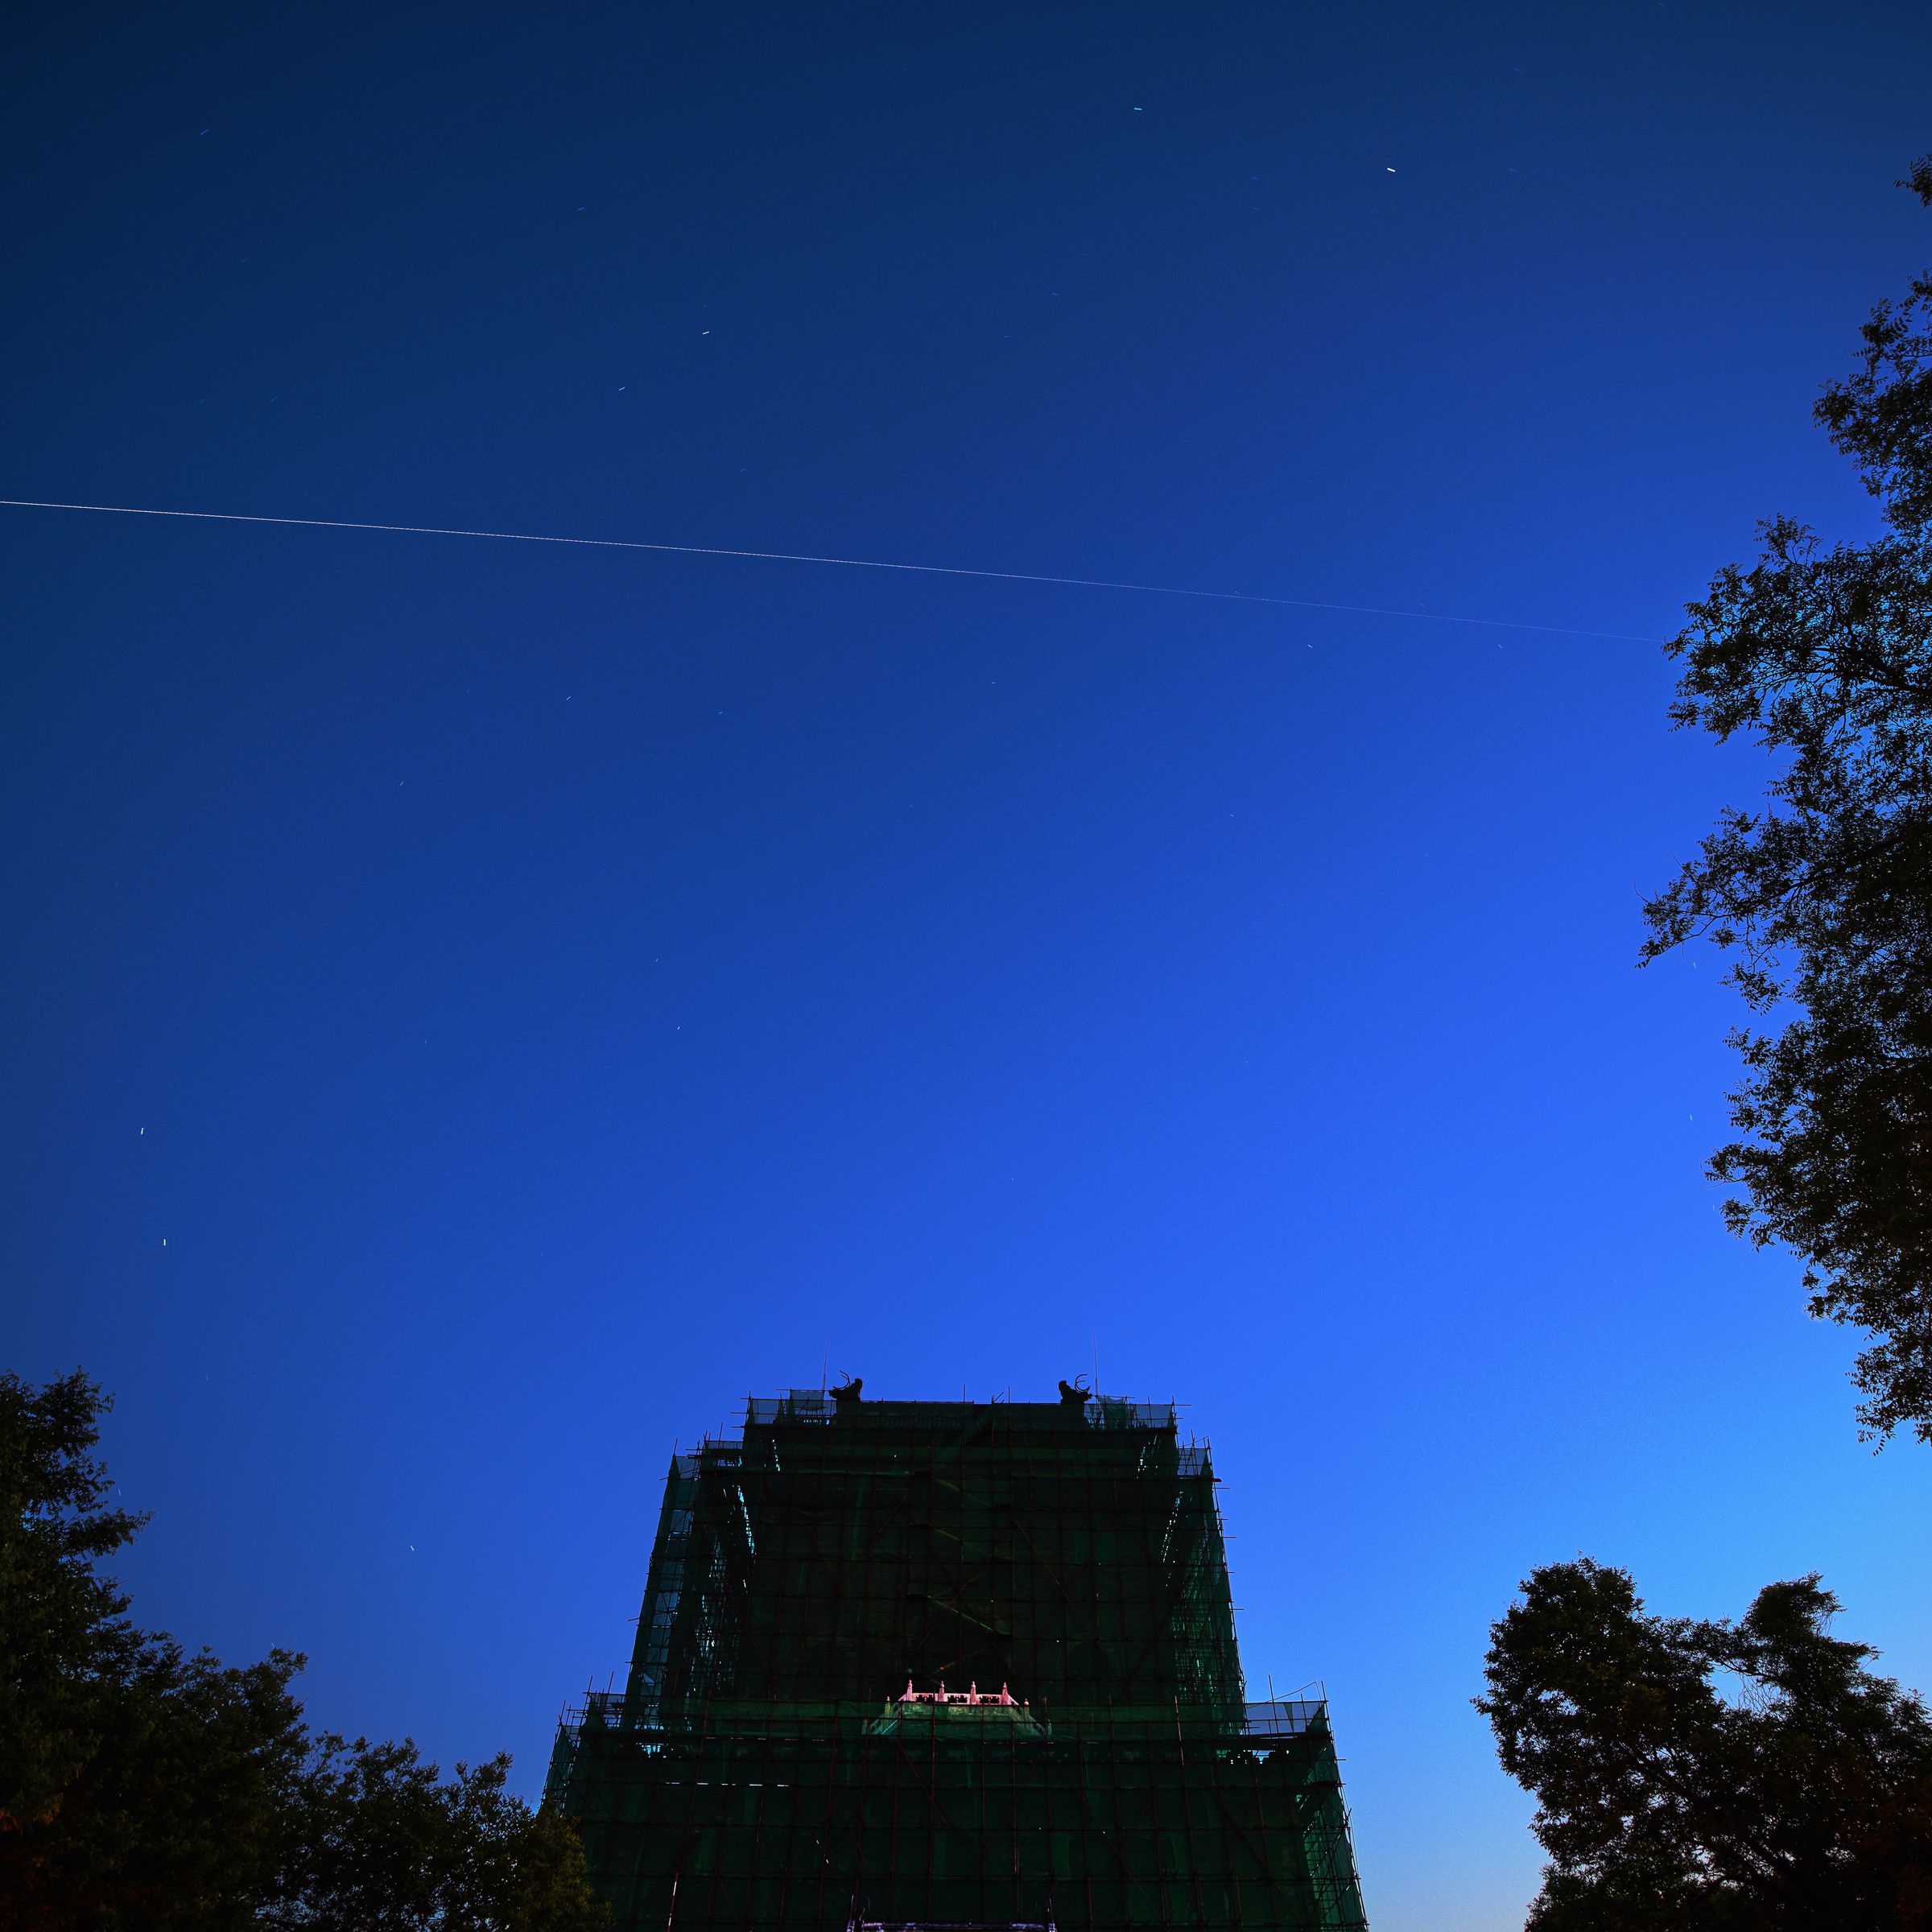 China’s space station core module ‘Tianhe’ flies over the Bell Tower on May 2, 2021 in Beijing, China.